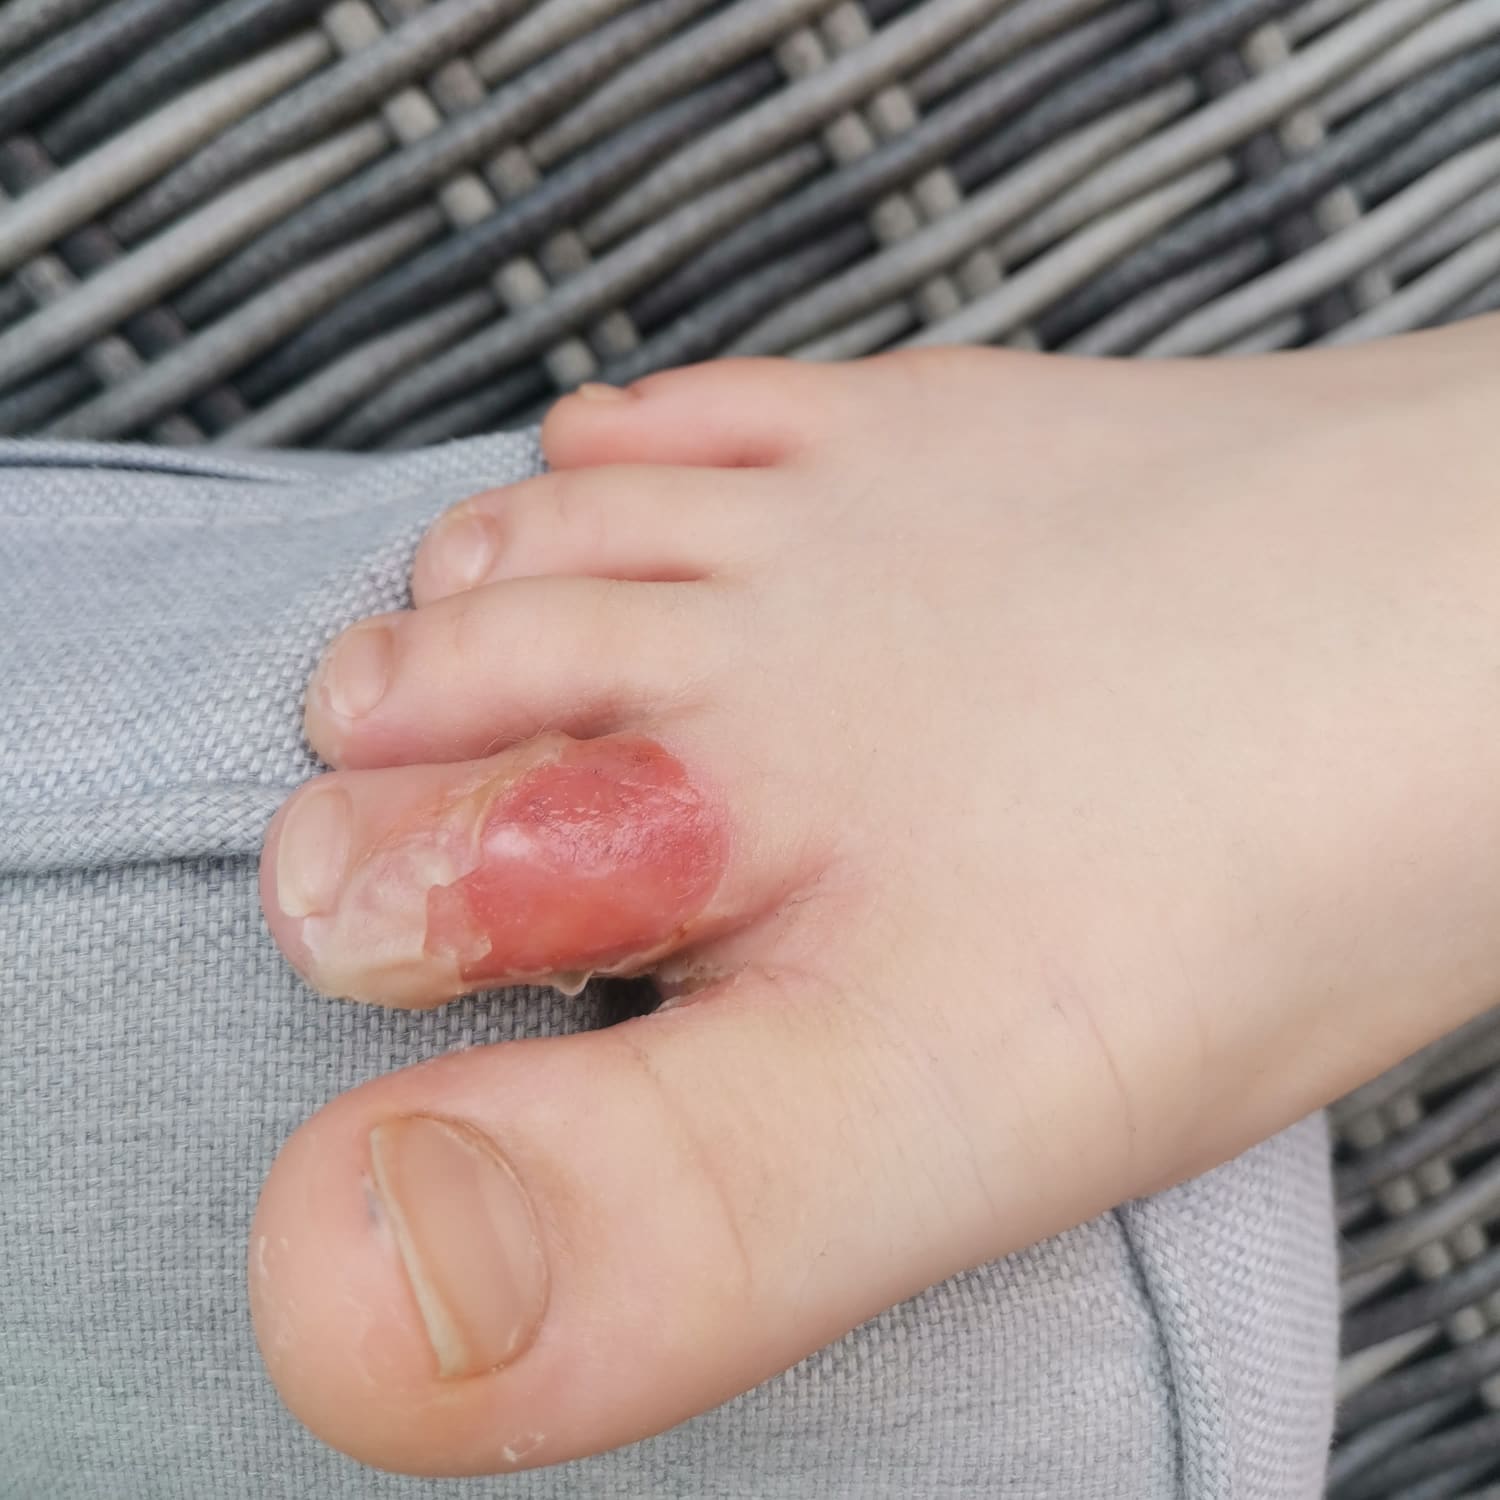 Large blister on foot